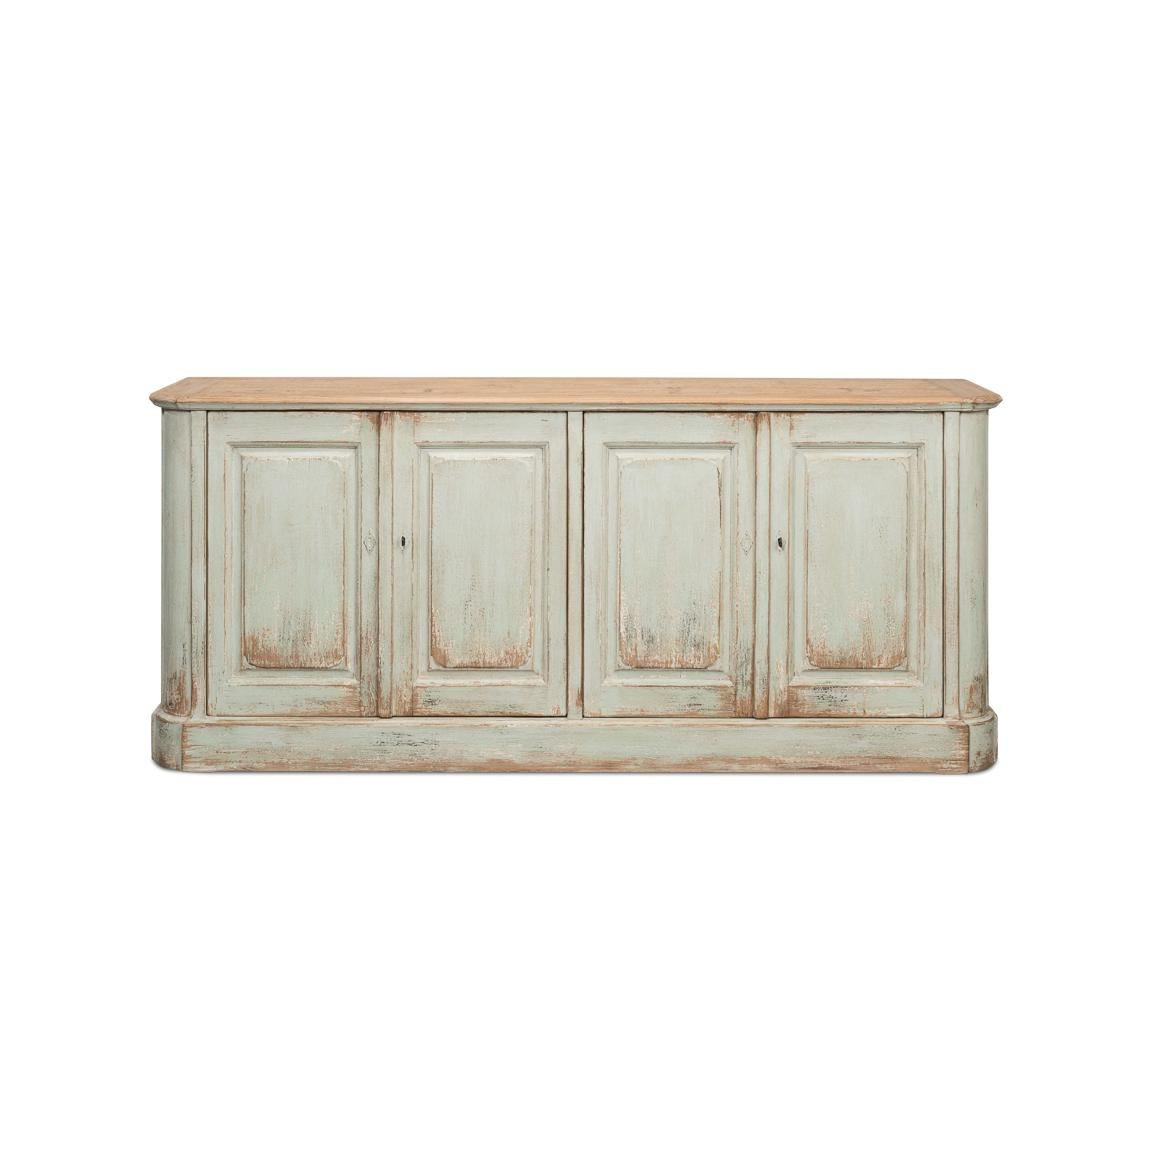 Beautifully finished in a serene sage painted finish. Perfect for those who appreciate the allure of rustic yet refined design, this sideboard marries functionality with a heartfelt nod to the natural world.

At 83 inches wide, 20 inches deep, and